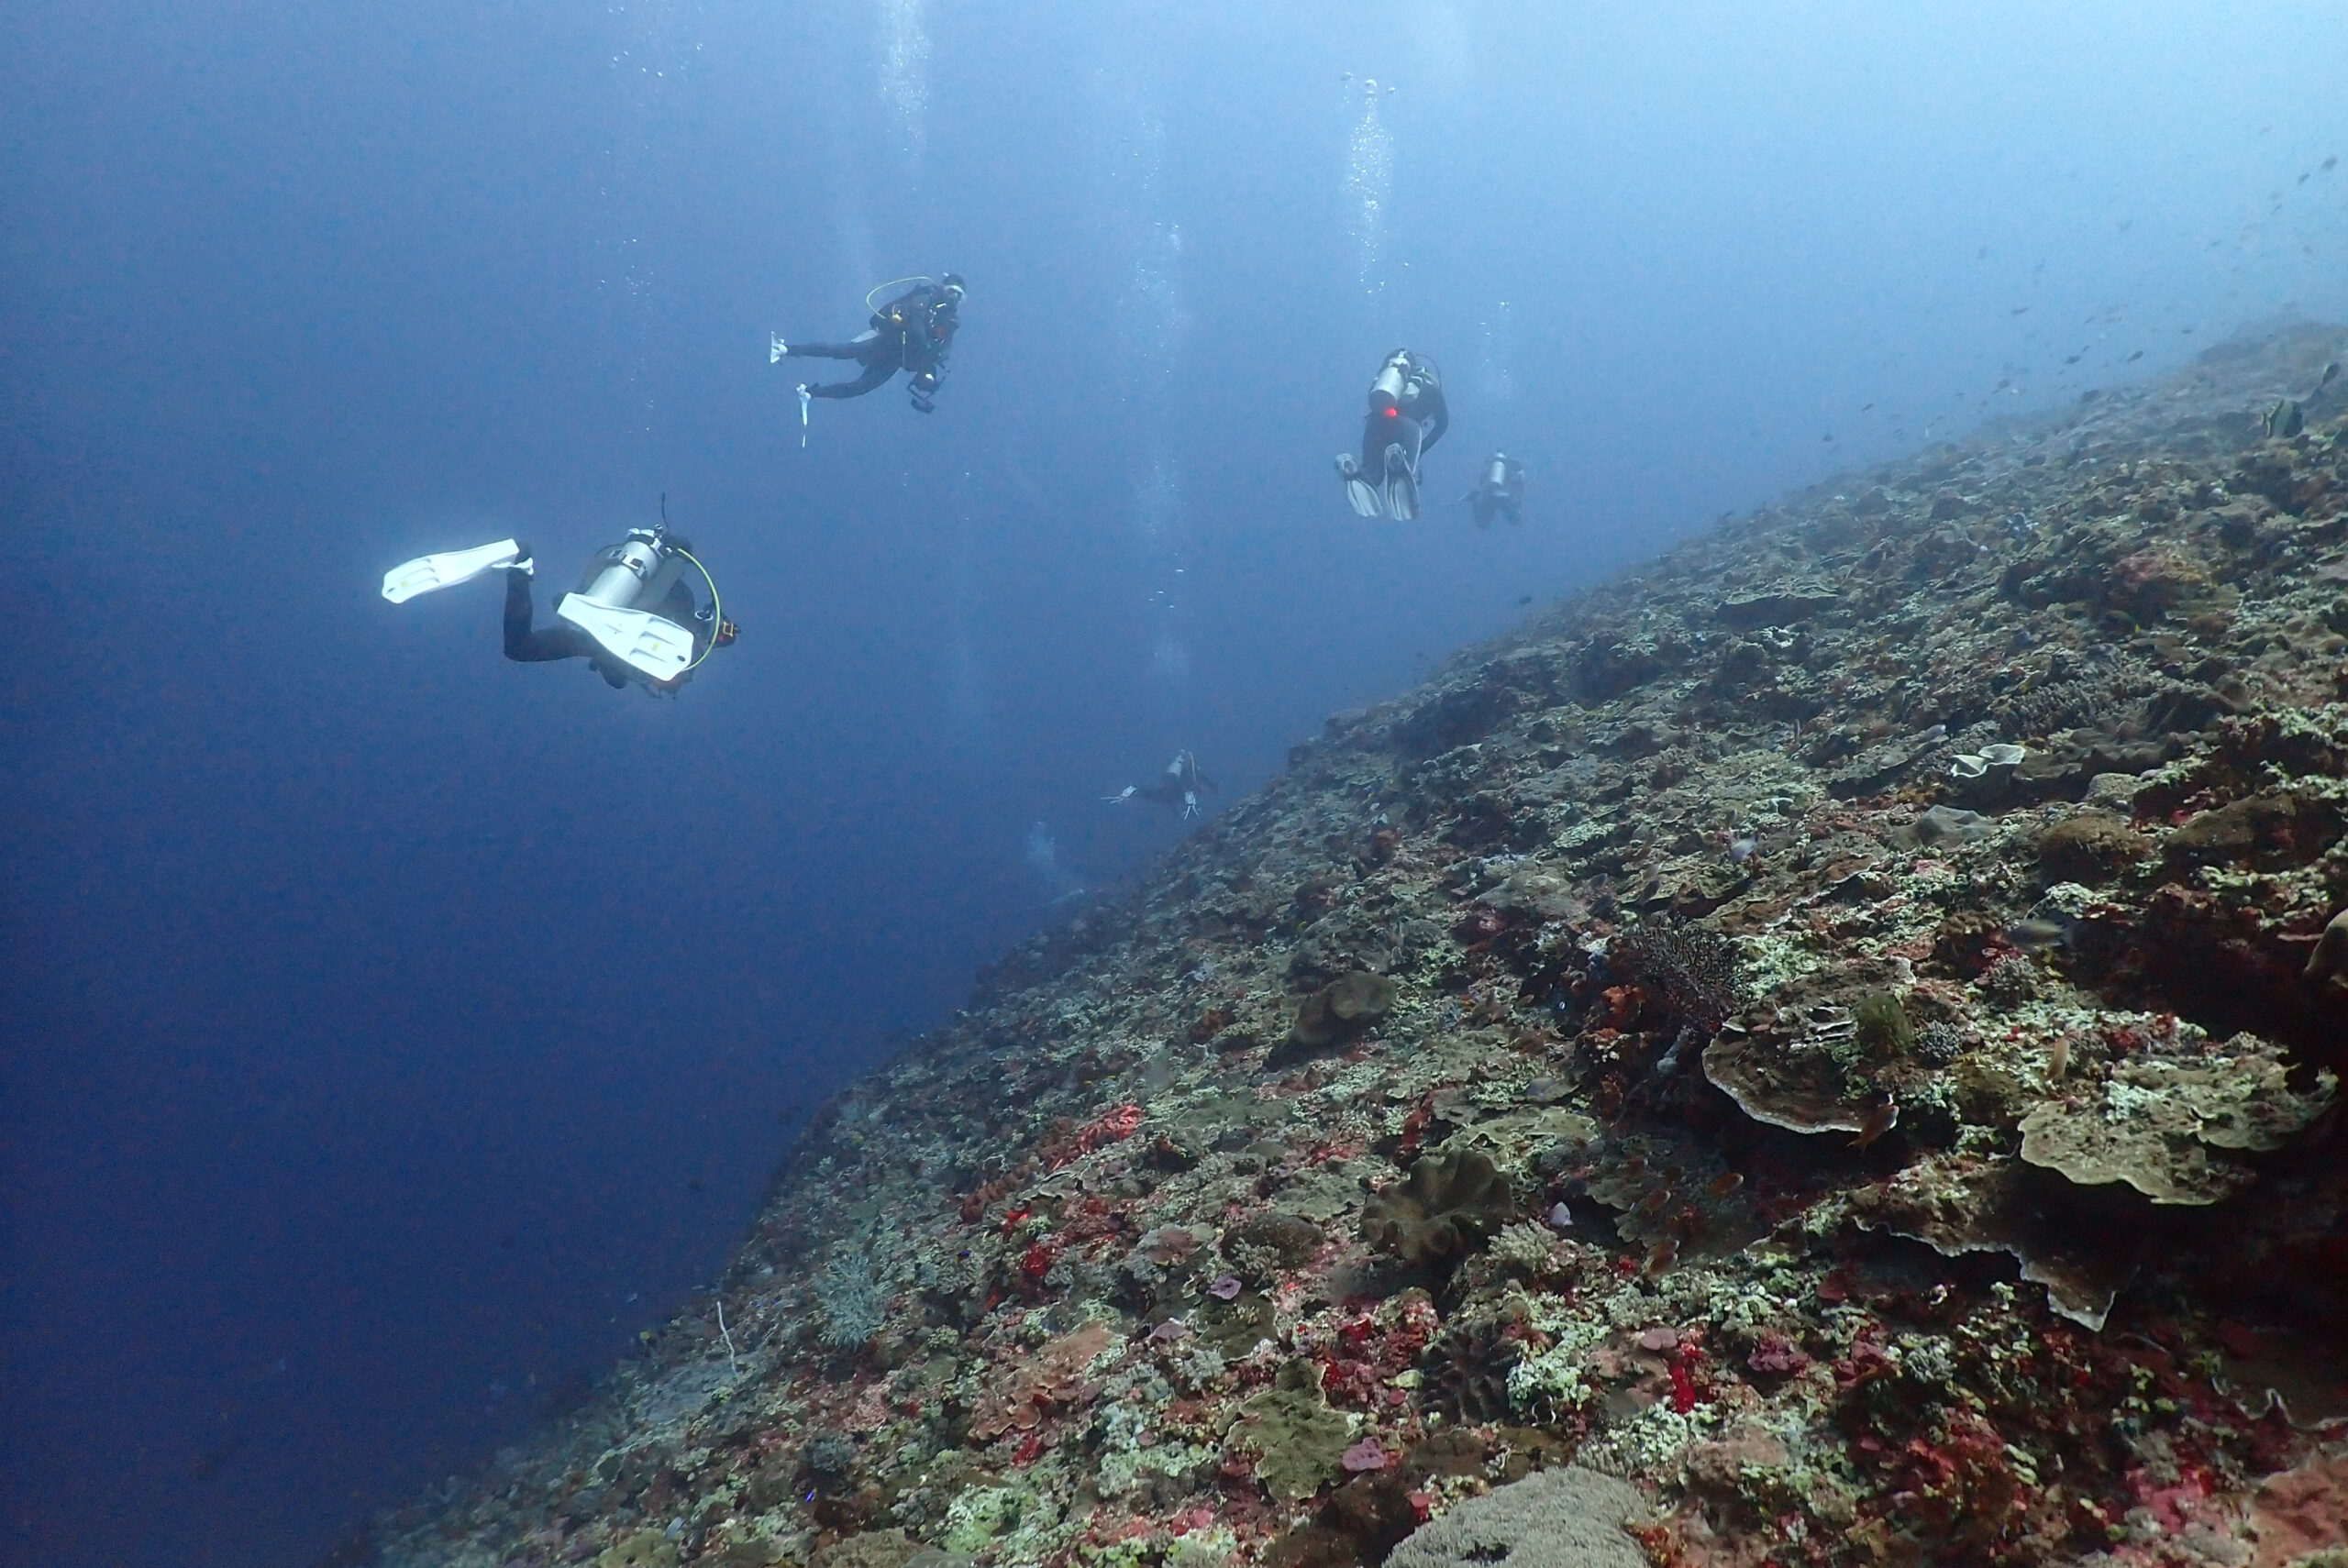 Diving with current - 001